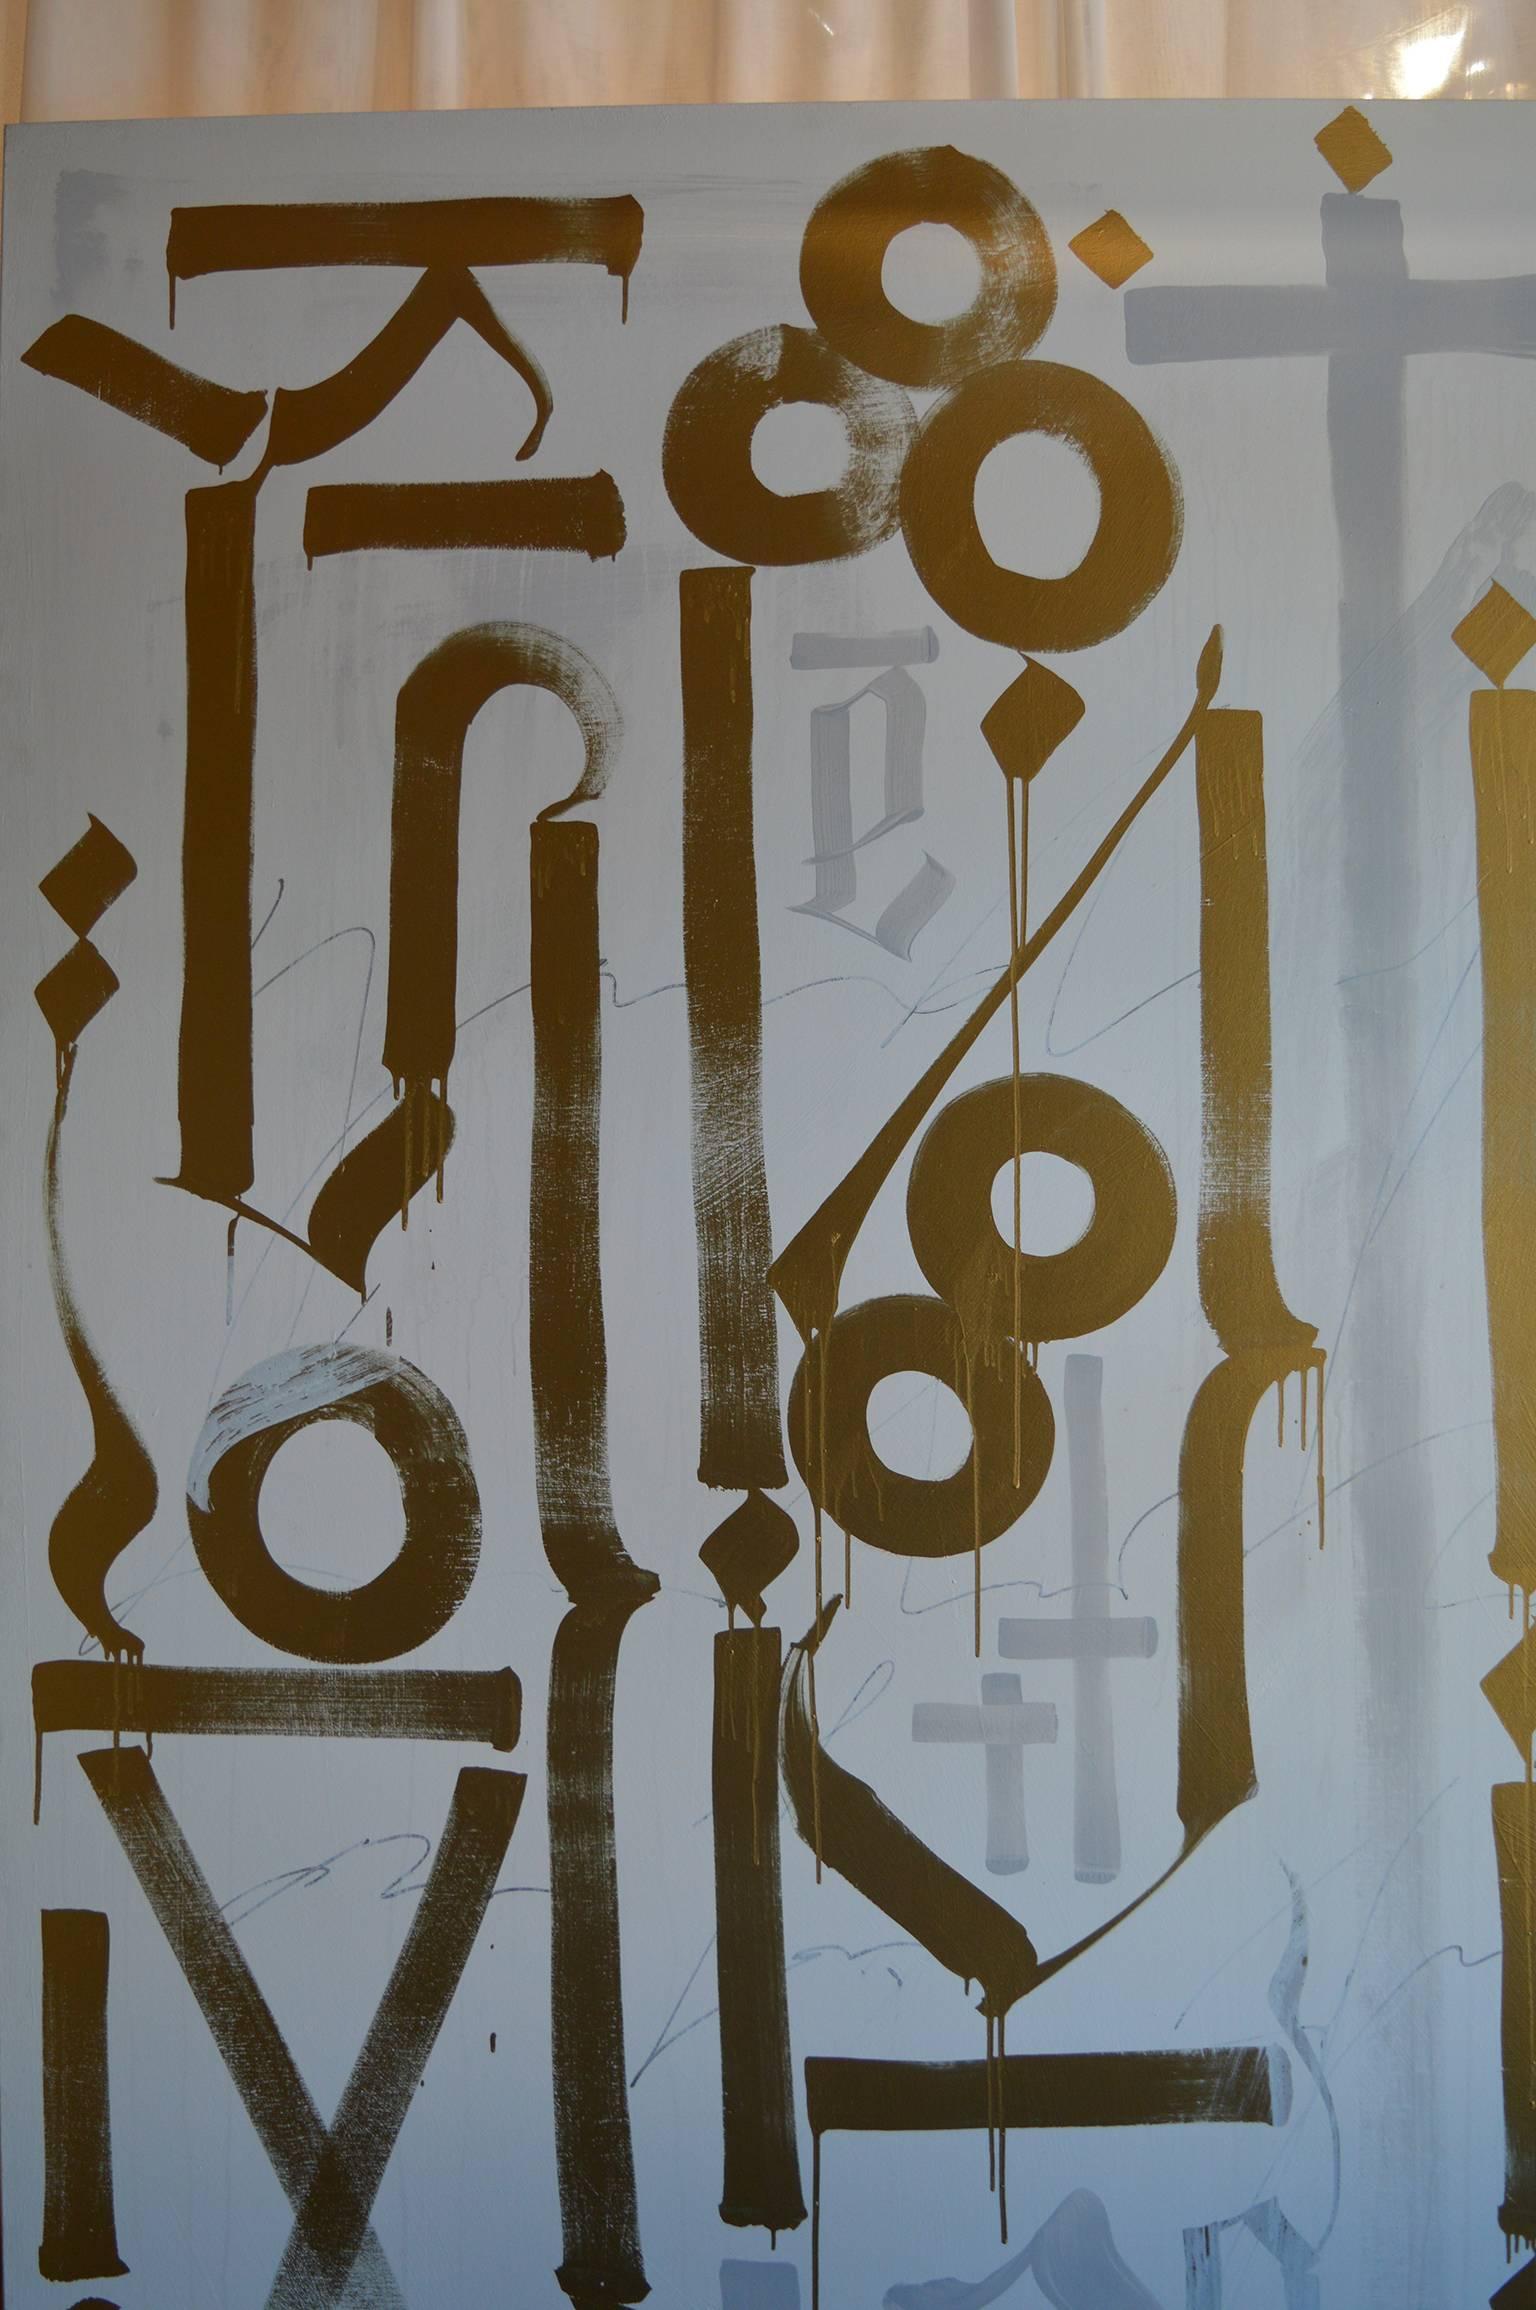 Large piece, untitled by Retna.
Retna is a contemporary artist, primarily recognized for graffiti art. Retna combines visual linguistics, urban poetics and appropriated fashion imagery to explore an eclectic range of media, including graffiti,